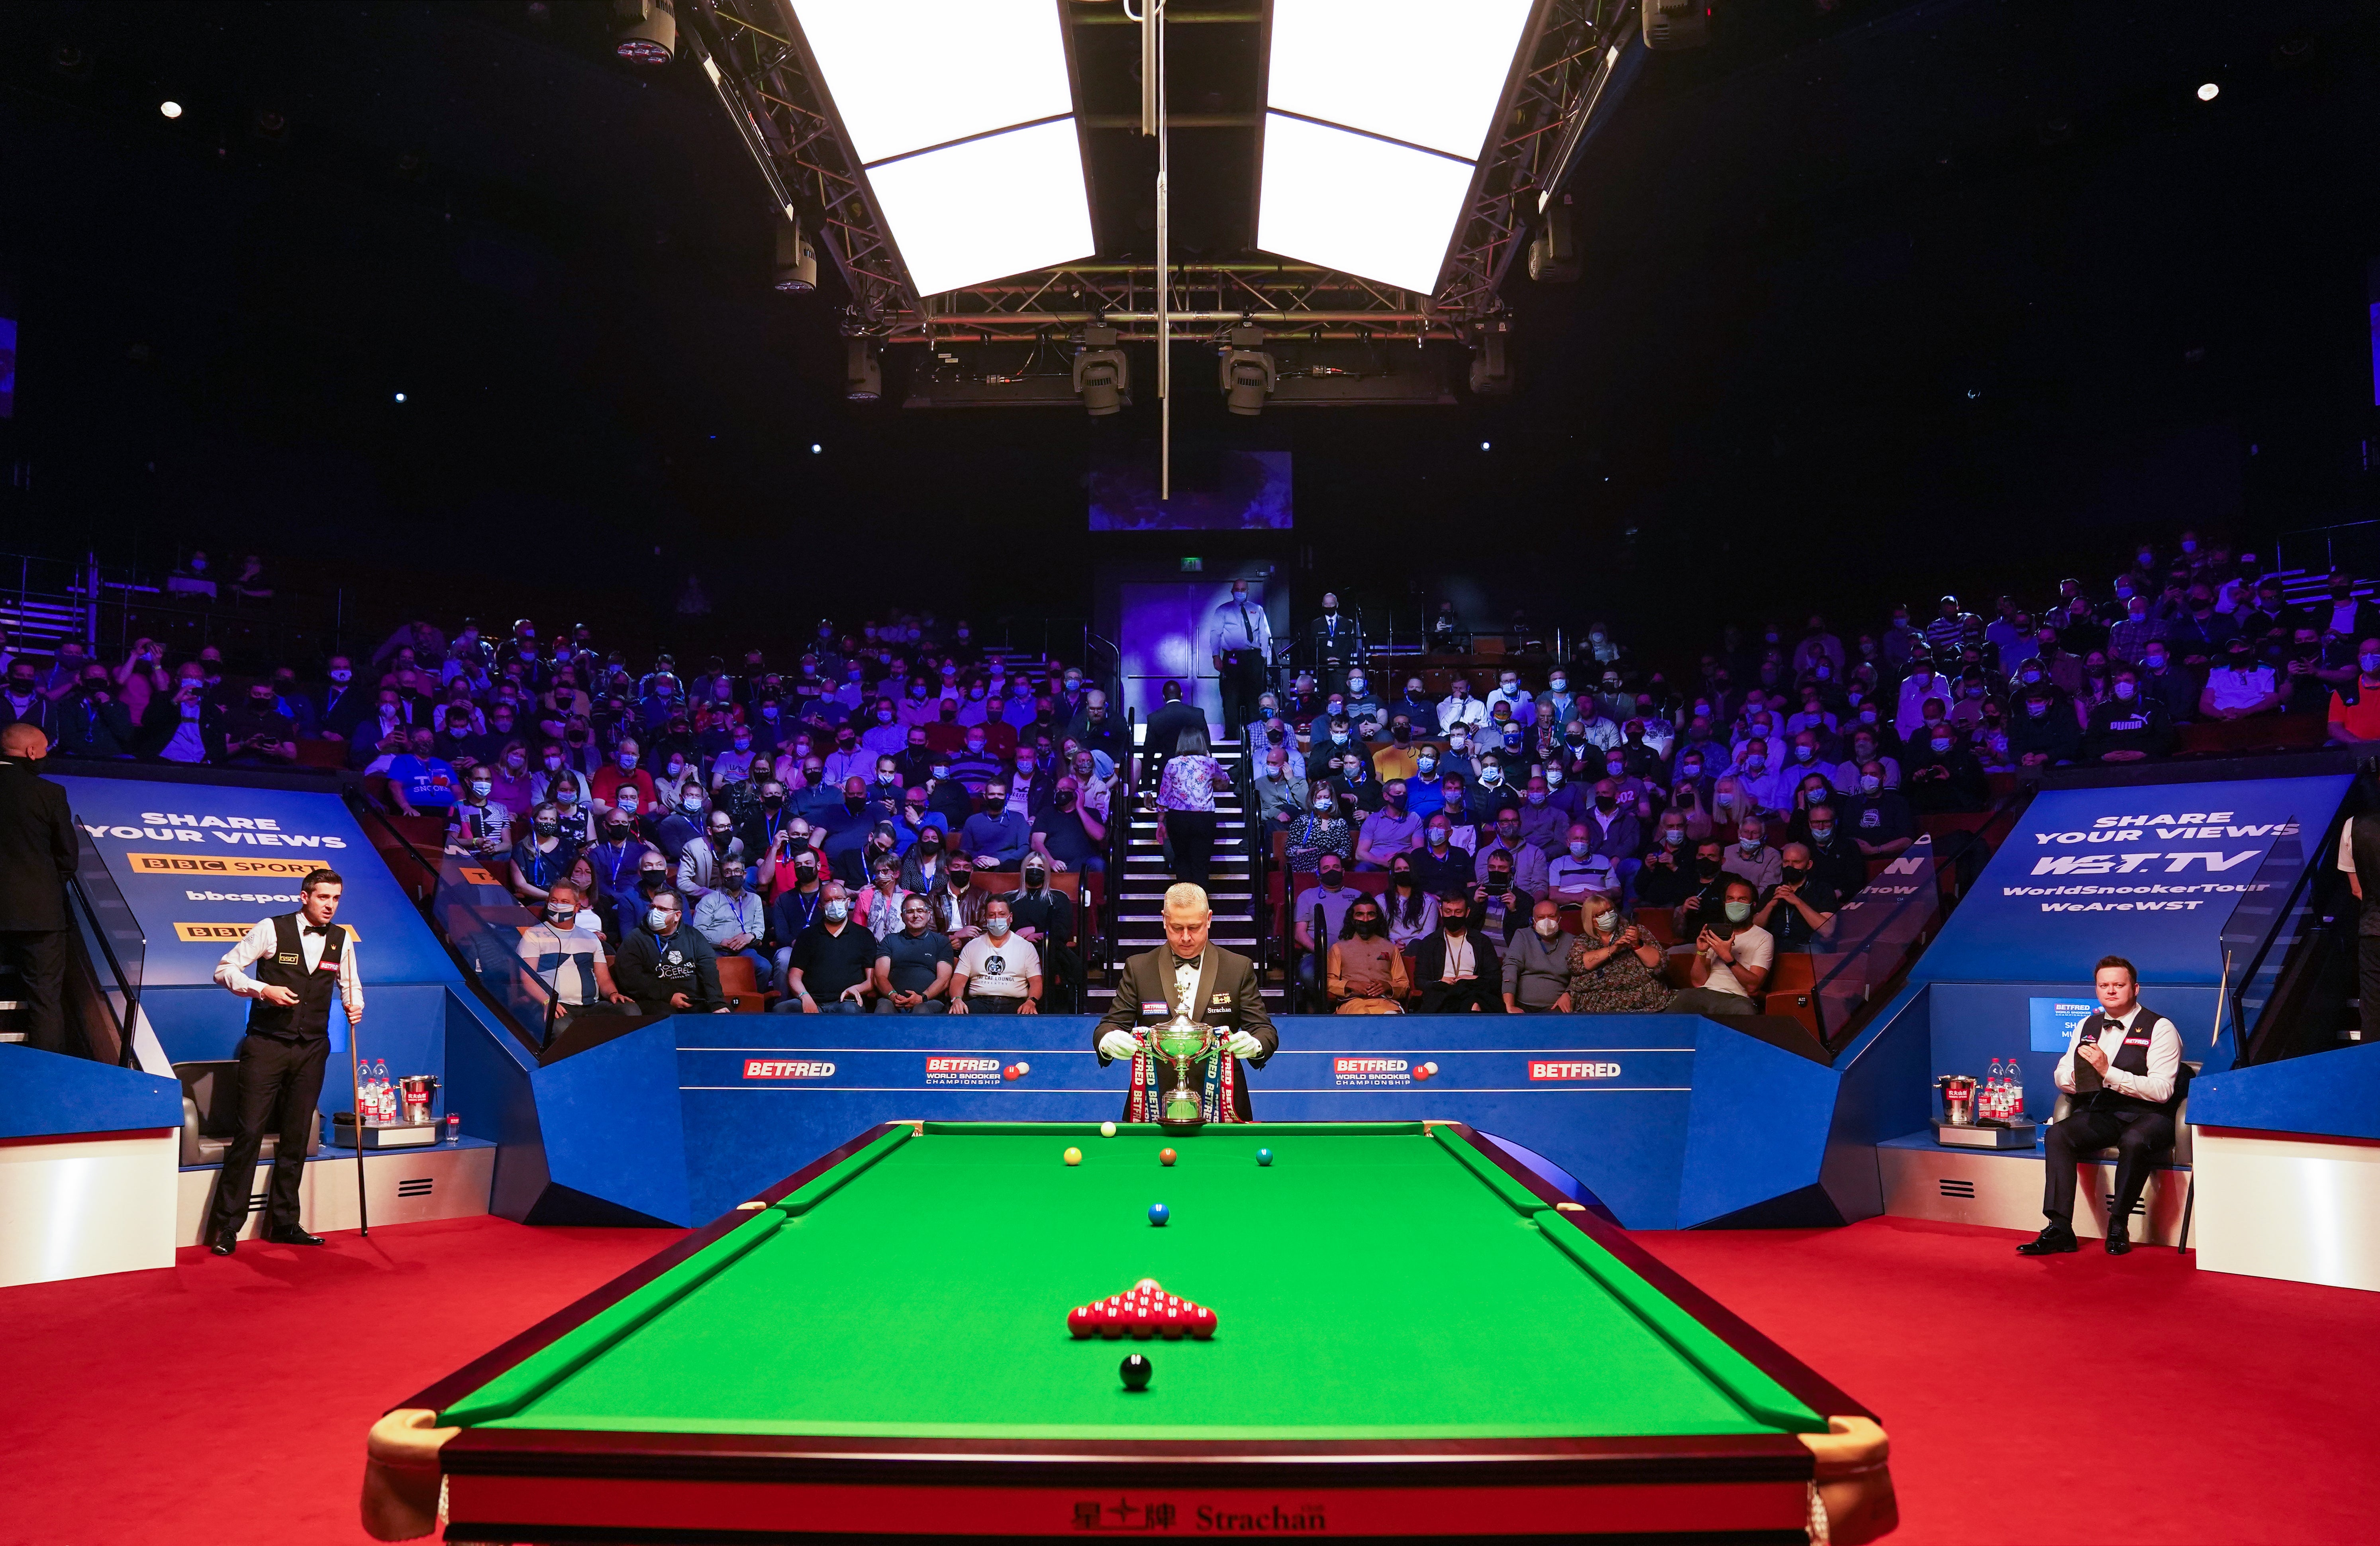 How many more world championship finals will the Crucible host?